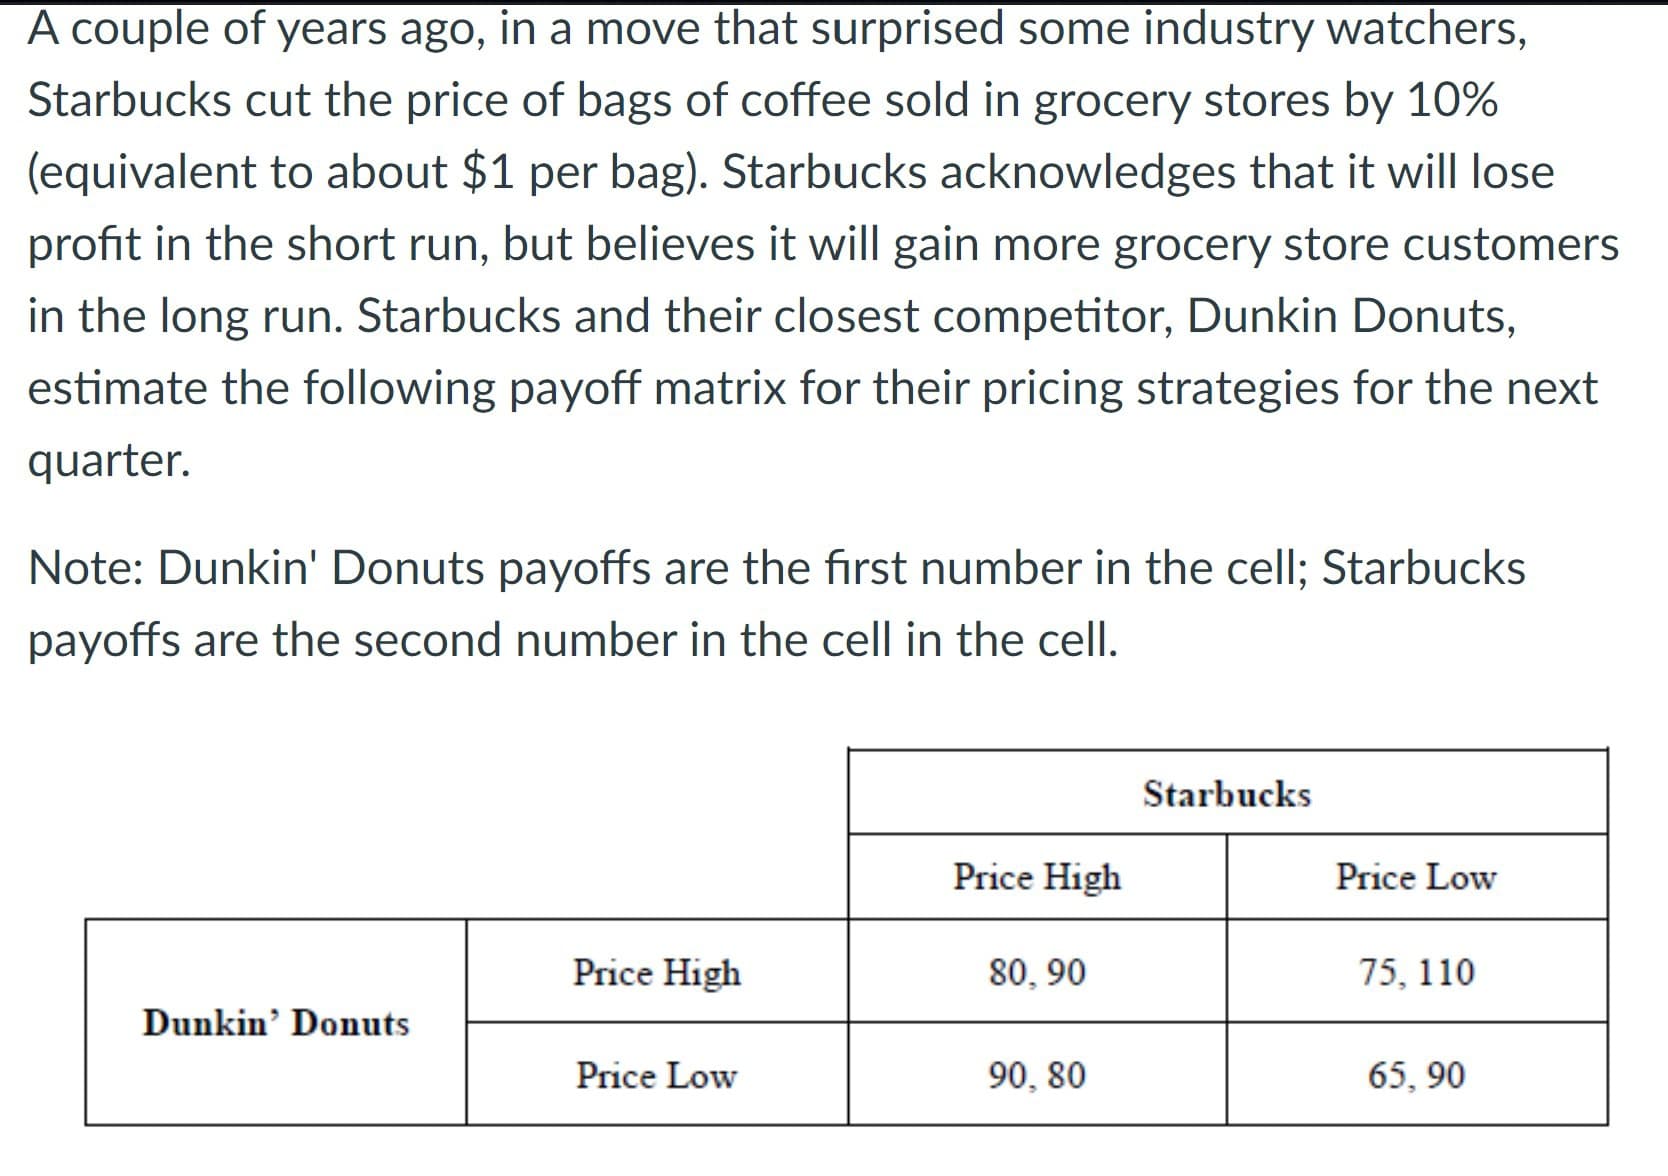 A couple of years ago, in a move that surprised some industry watchers,
Starbucks cut the price of bags of coffee sold in grocery stores by 10%
(equivalent to about $1 per bag). Starbucks acknowledges that it will lose
profit in the short run, but believes it will gain more grocery store customers
in the long run. Starbucks and their closest competitor, Dunkin Donuts,
estimate the following payoff matrix for their pricing strategies for the next
quarter.
Note: Dunkin' Donuts payoffs are the first number in the cell; Starbucks
payoffs are the second number in the cell in the cell.
Dunkin' Donuts
Price High
Price Low
Price High
80,90
90, 80
Starbucks
Price Low
75, 110
65,90